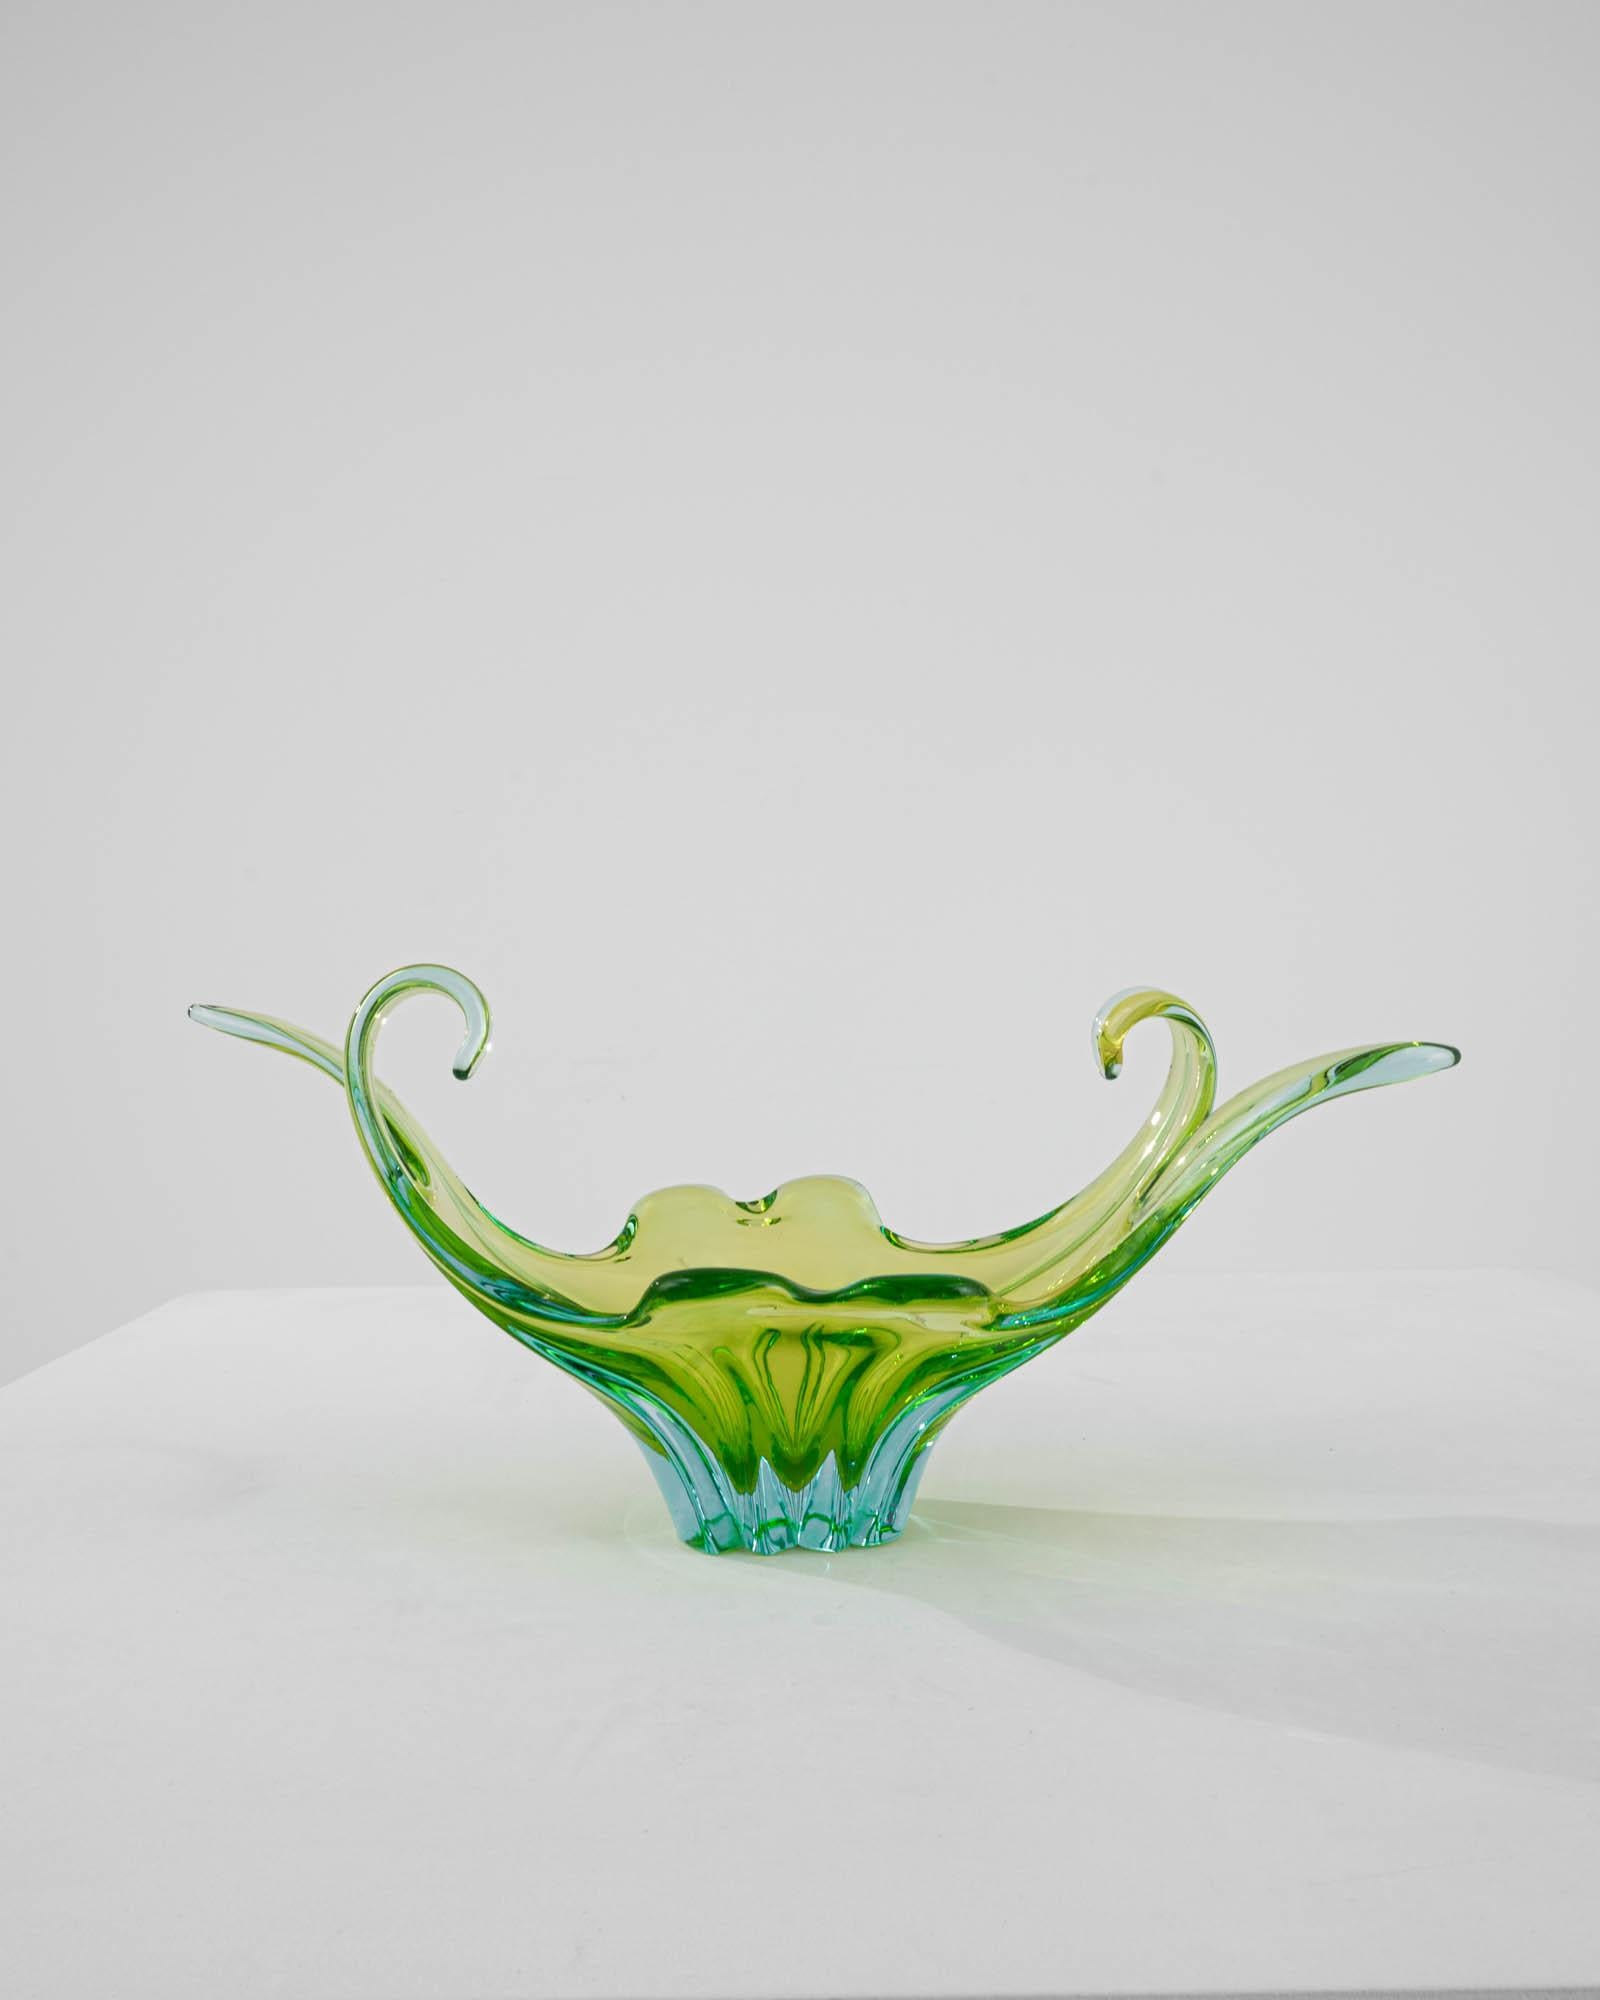 Combining a graceful silhouette with a vibrant, eye-catching interplay of colors, this vintage glass plateau offers a unique objet d’art. Made in Italy in the 20th century, the impressive craftsmanship necessary to form such a complex piece is